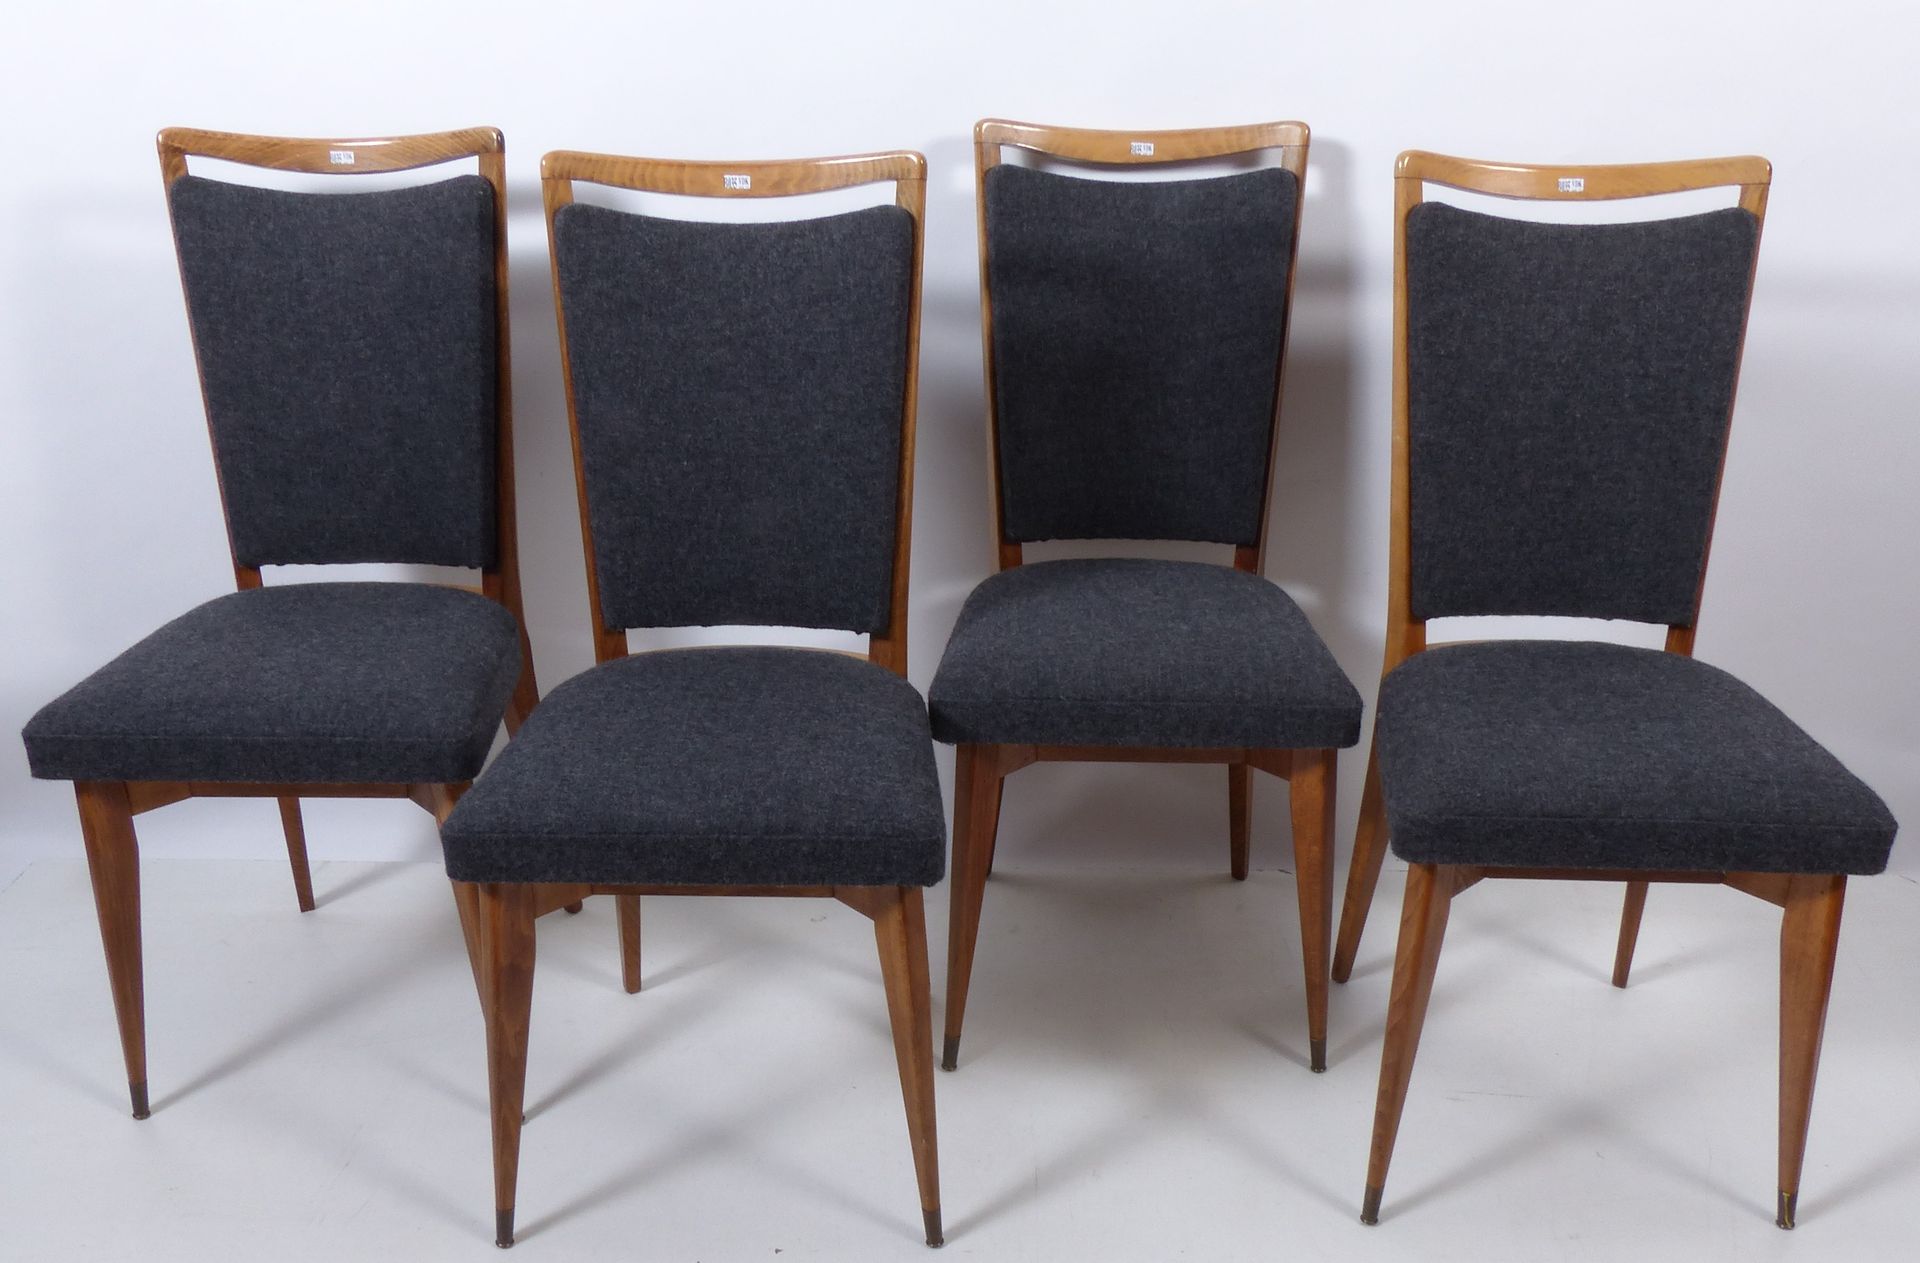 Null Suite of 4 Italian chairs. Circa 1950/60.